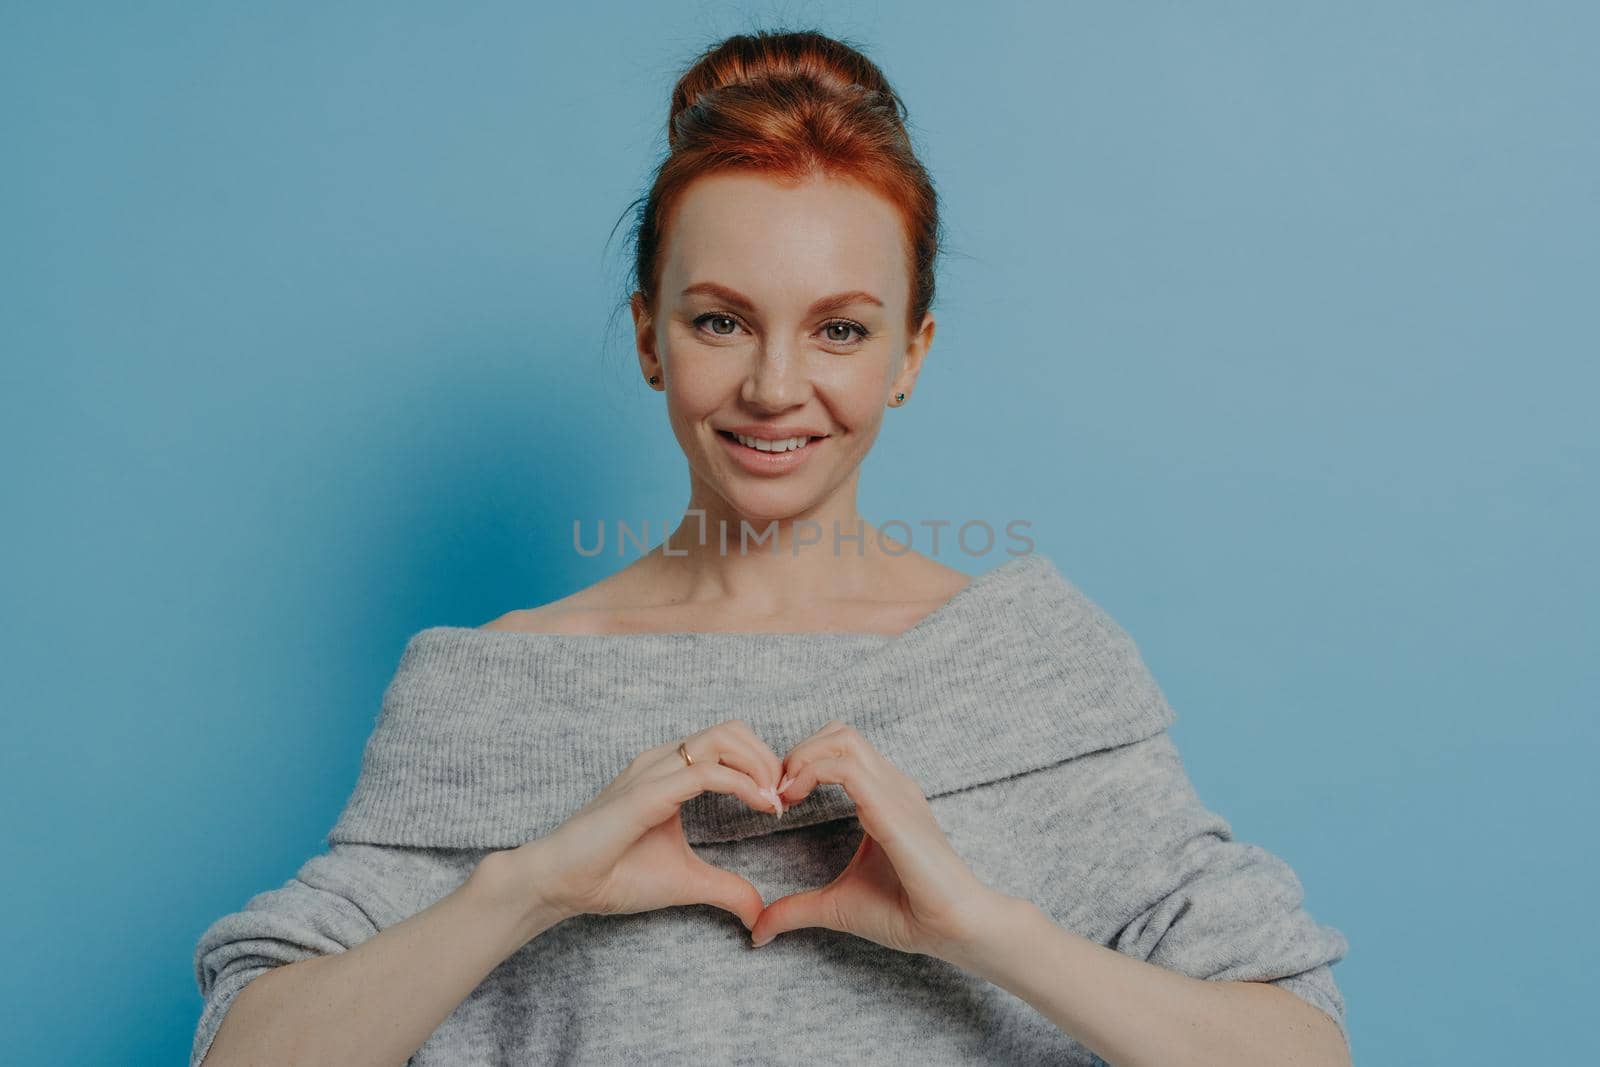 Kind smiling red haired woman showing heart gesture on chest while standing isolated on blue wall background, happy ginger female demonstrating love, care and tenderness, dressed in knitted sweater